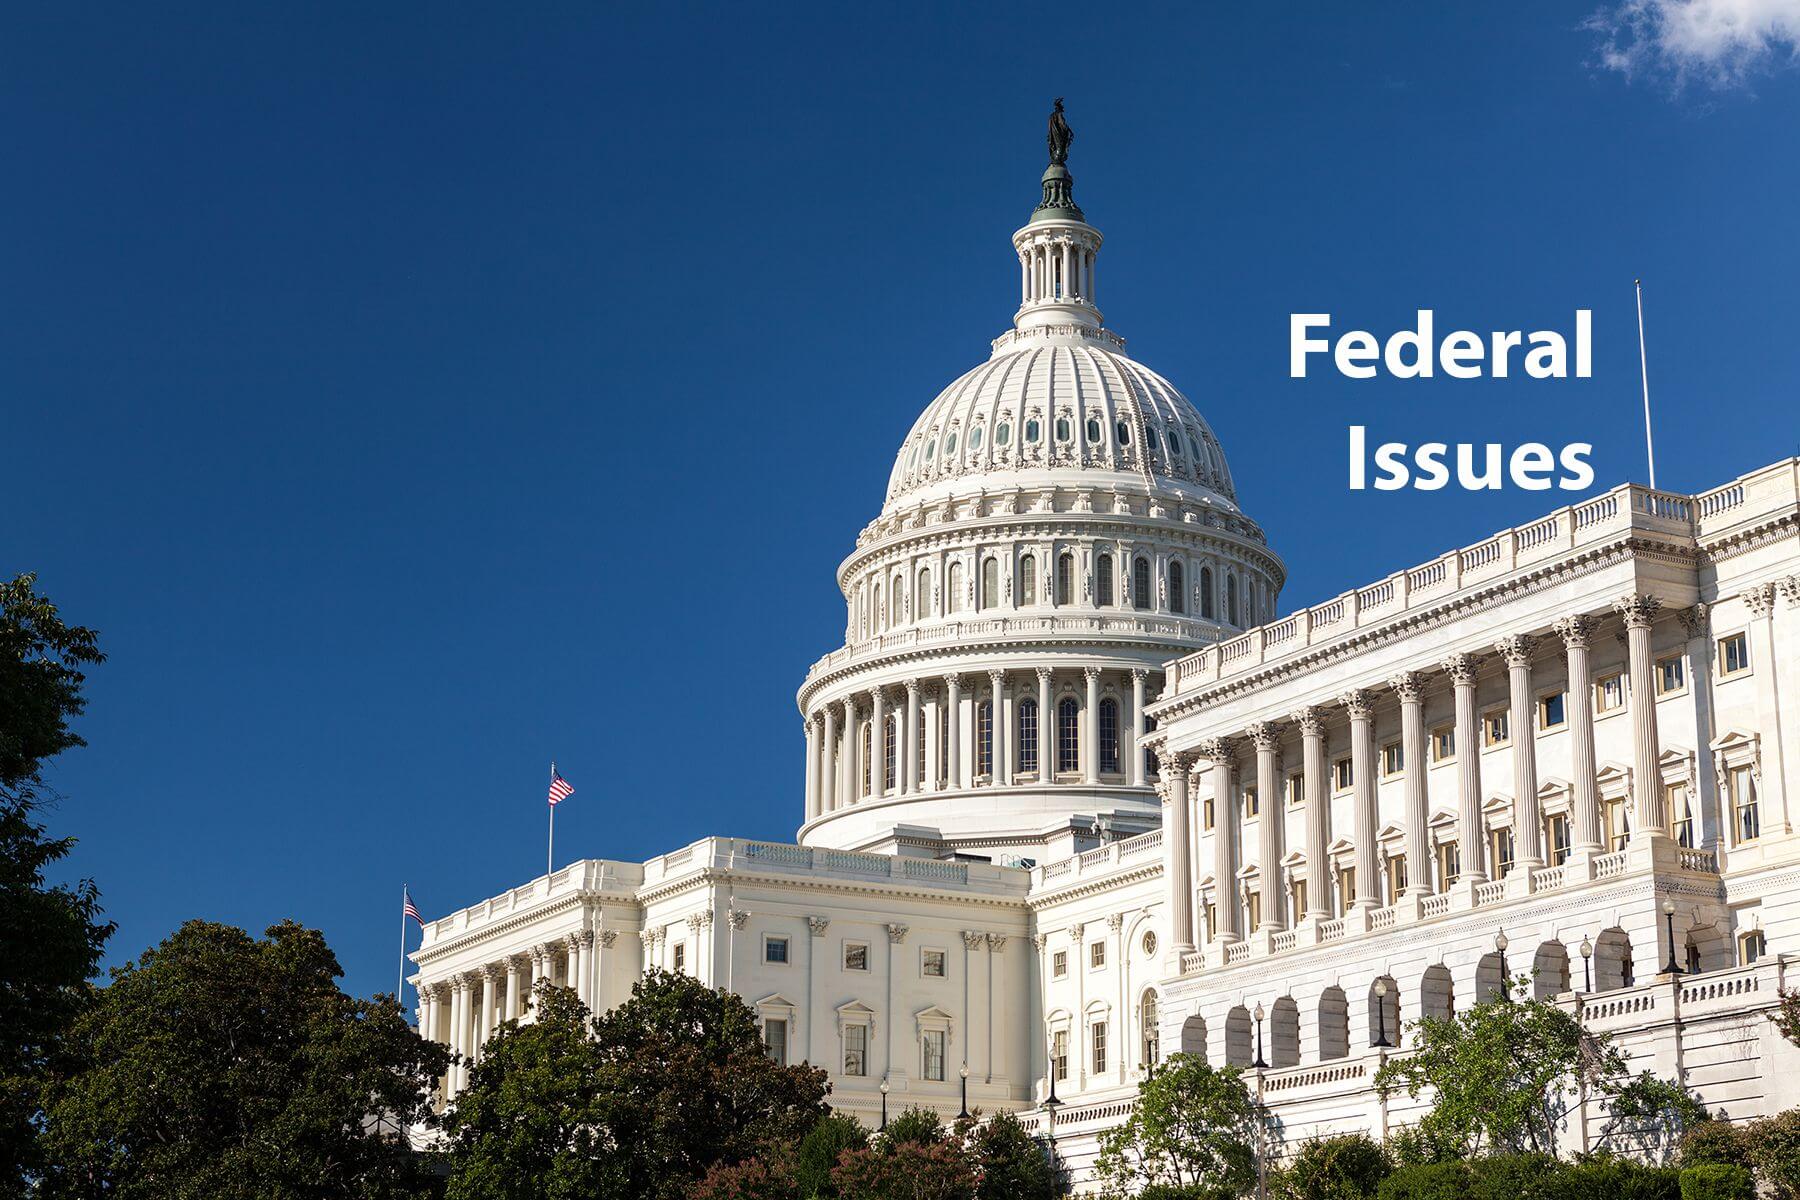 Federal issues